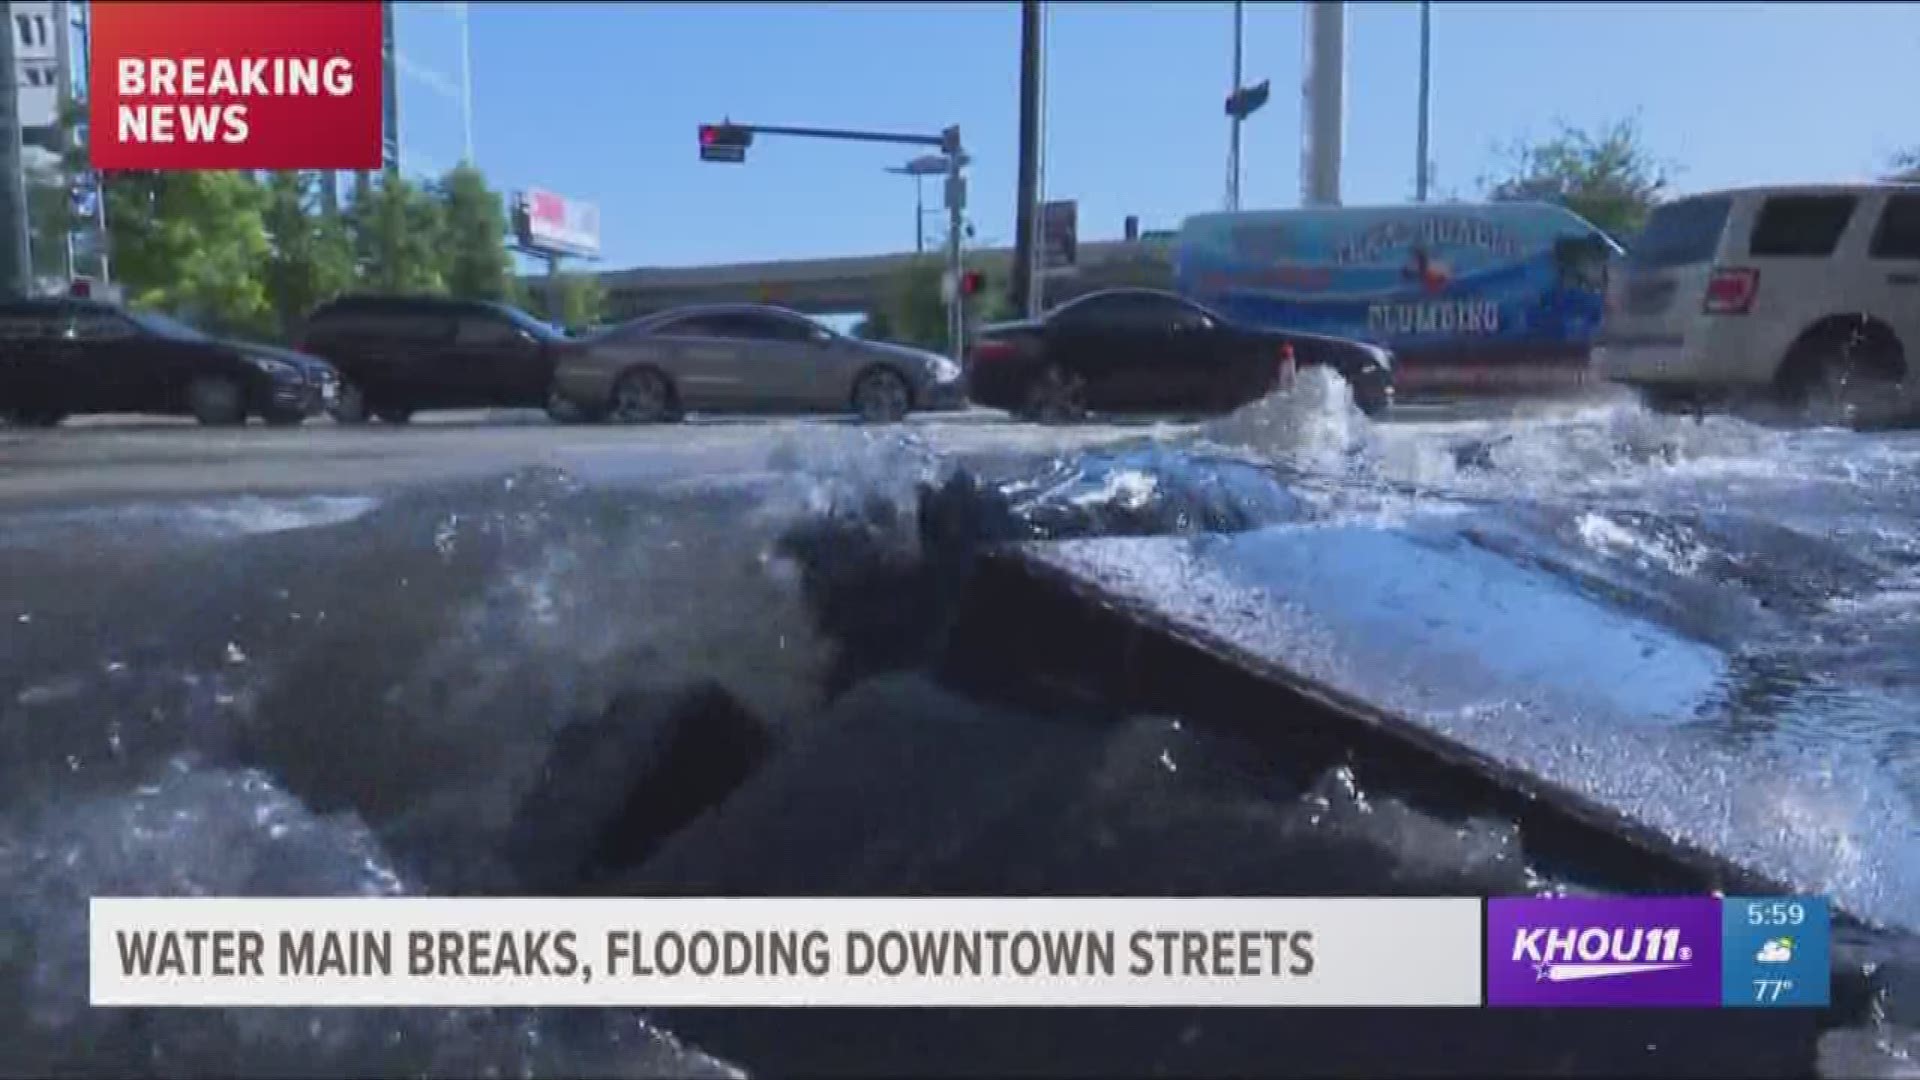 A water main break in downtown Houston caused quite a mess Thursday afternoon.